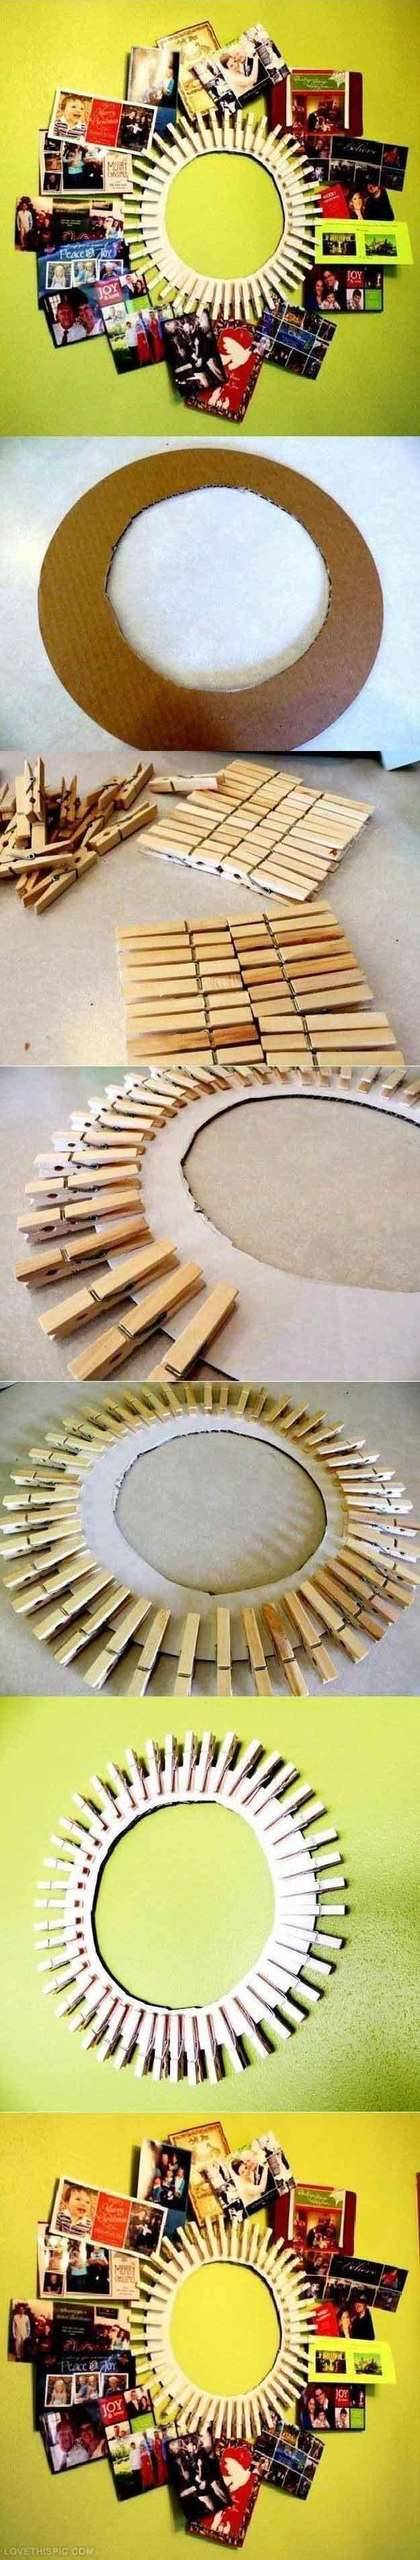 1453199487 diy projects for teens bedroom ideas clothespin mirror